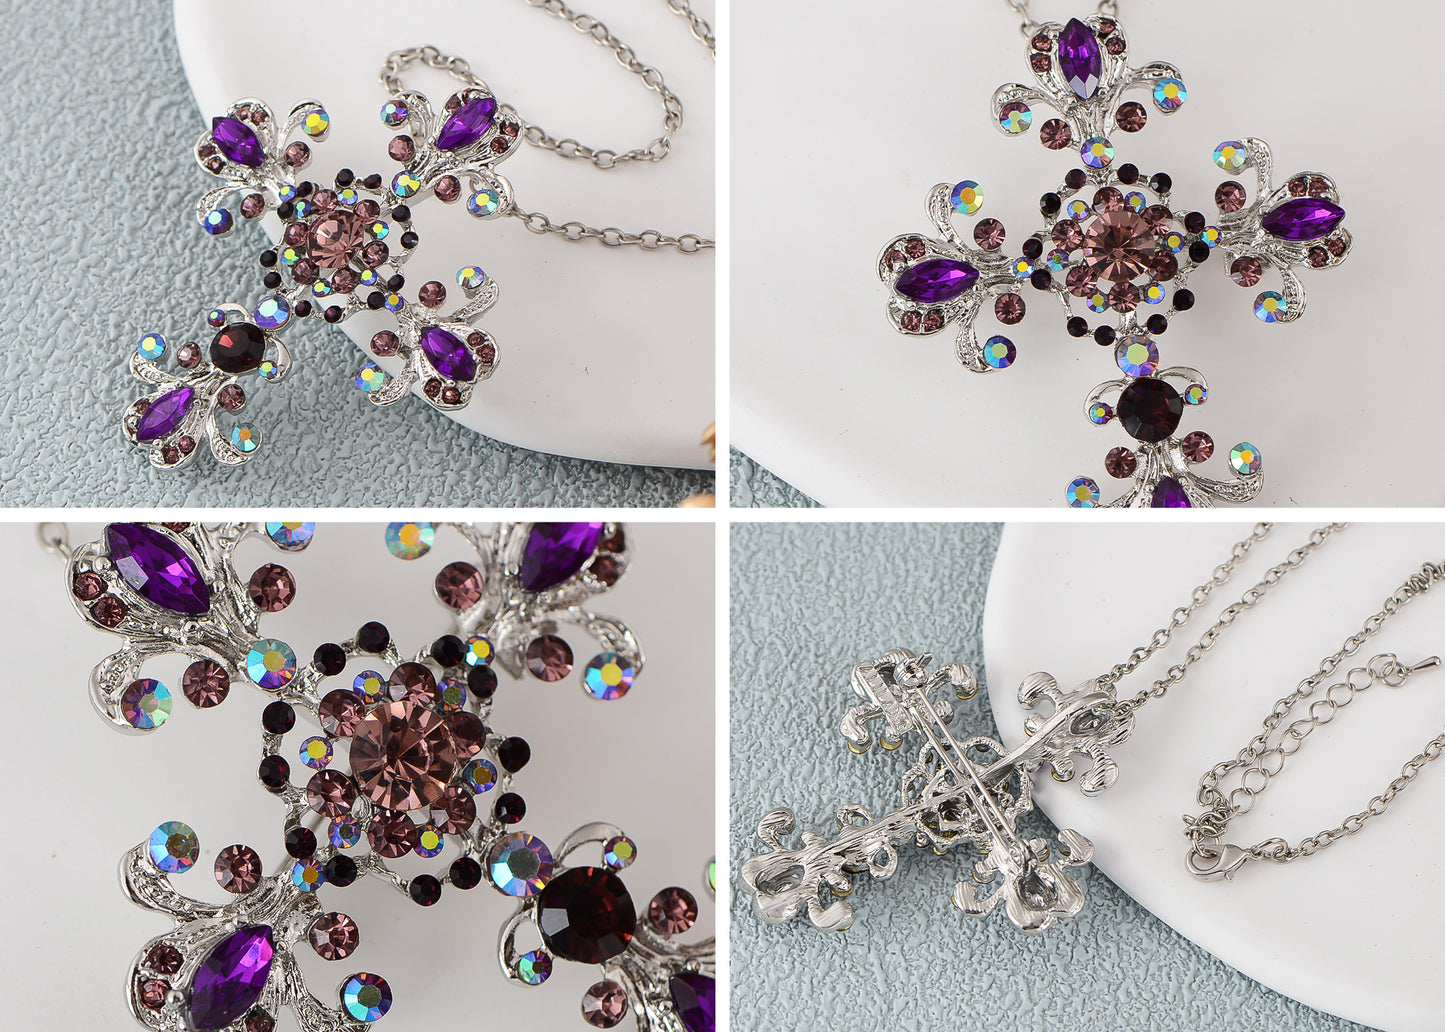 Alilang Religious Cross Pendant Necklace Sparkle Crystal Rhinestones Brooch Pin Gothic Jewelry for Women Men